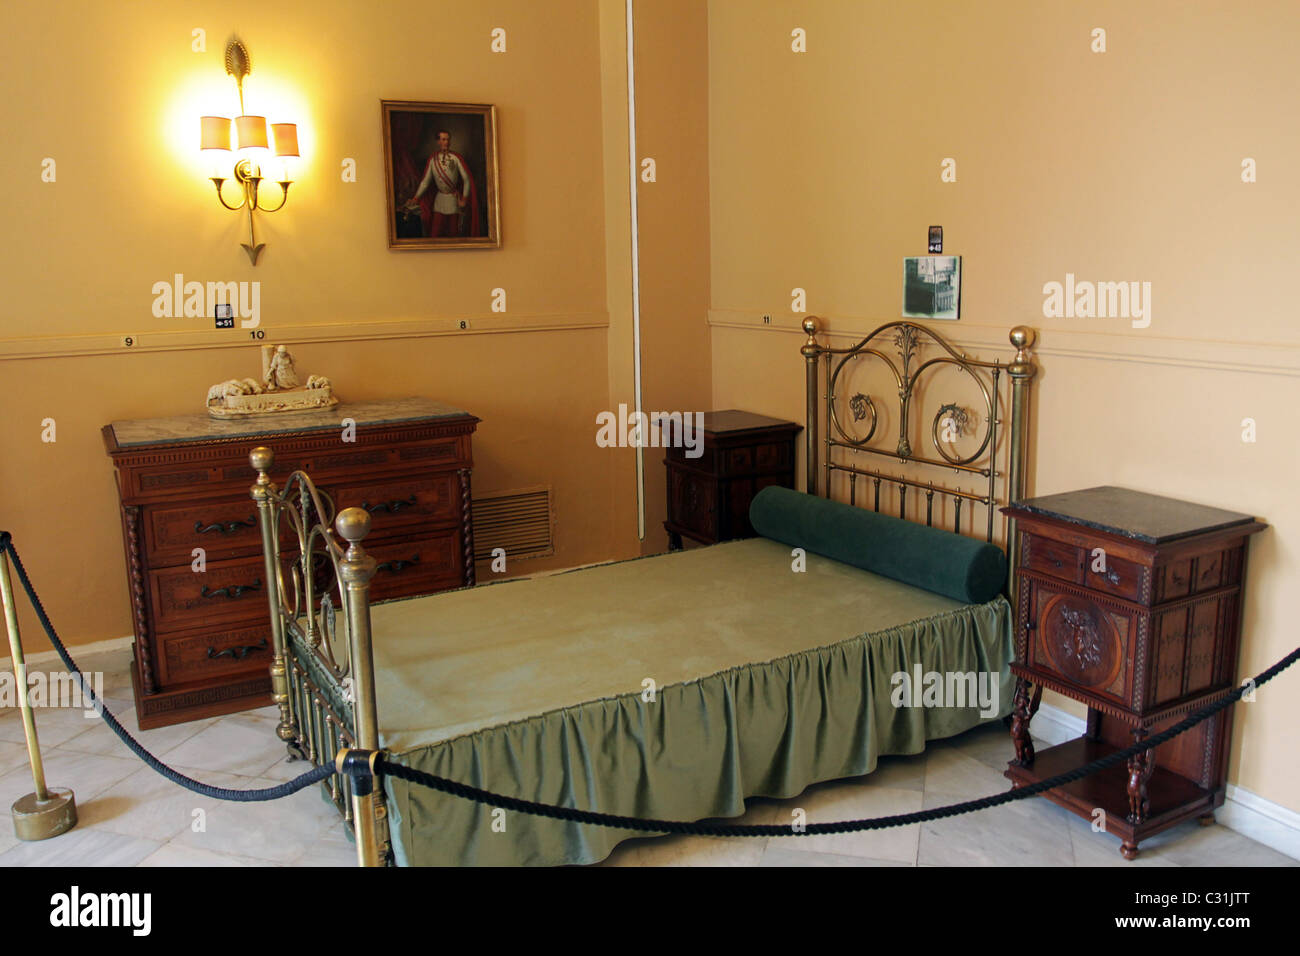 A BEDROOM IN THE ACHILLEION PALACE, THE FORMER SUMMER RESIDENCE OF EMPRESS ELIZABETH OF AUSTRIA, CALLED SISSI, CORFU, GREECE Stock Photo